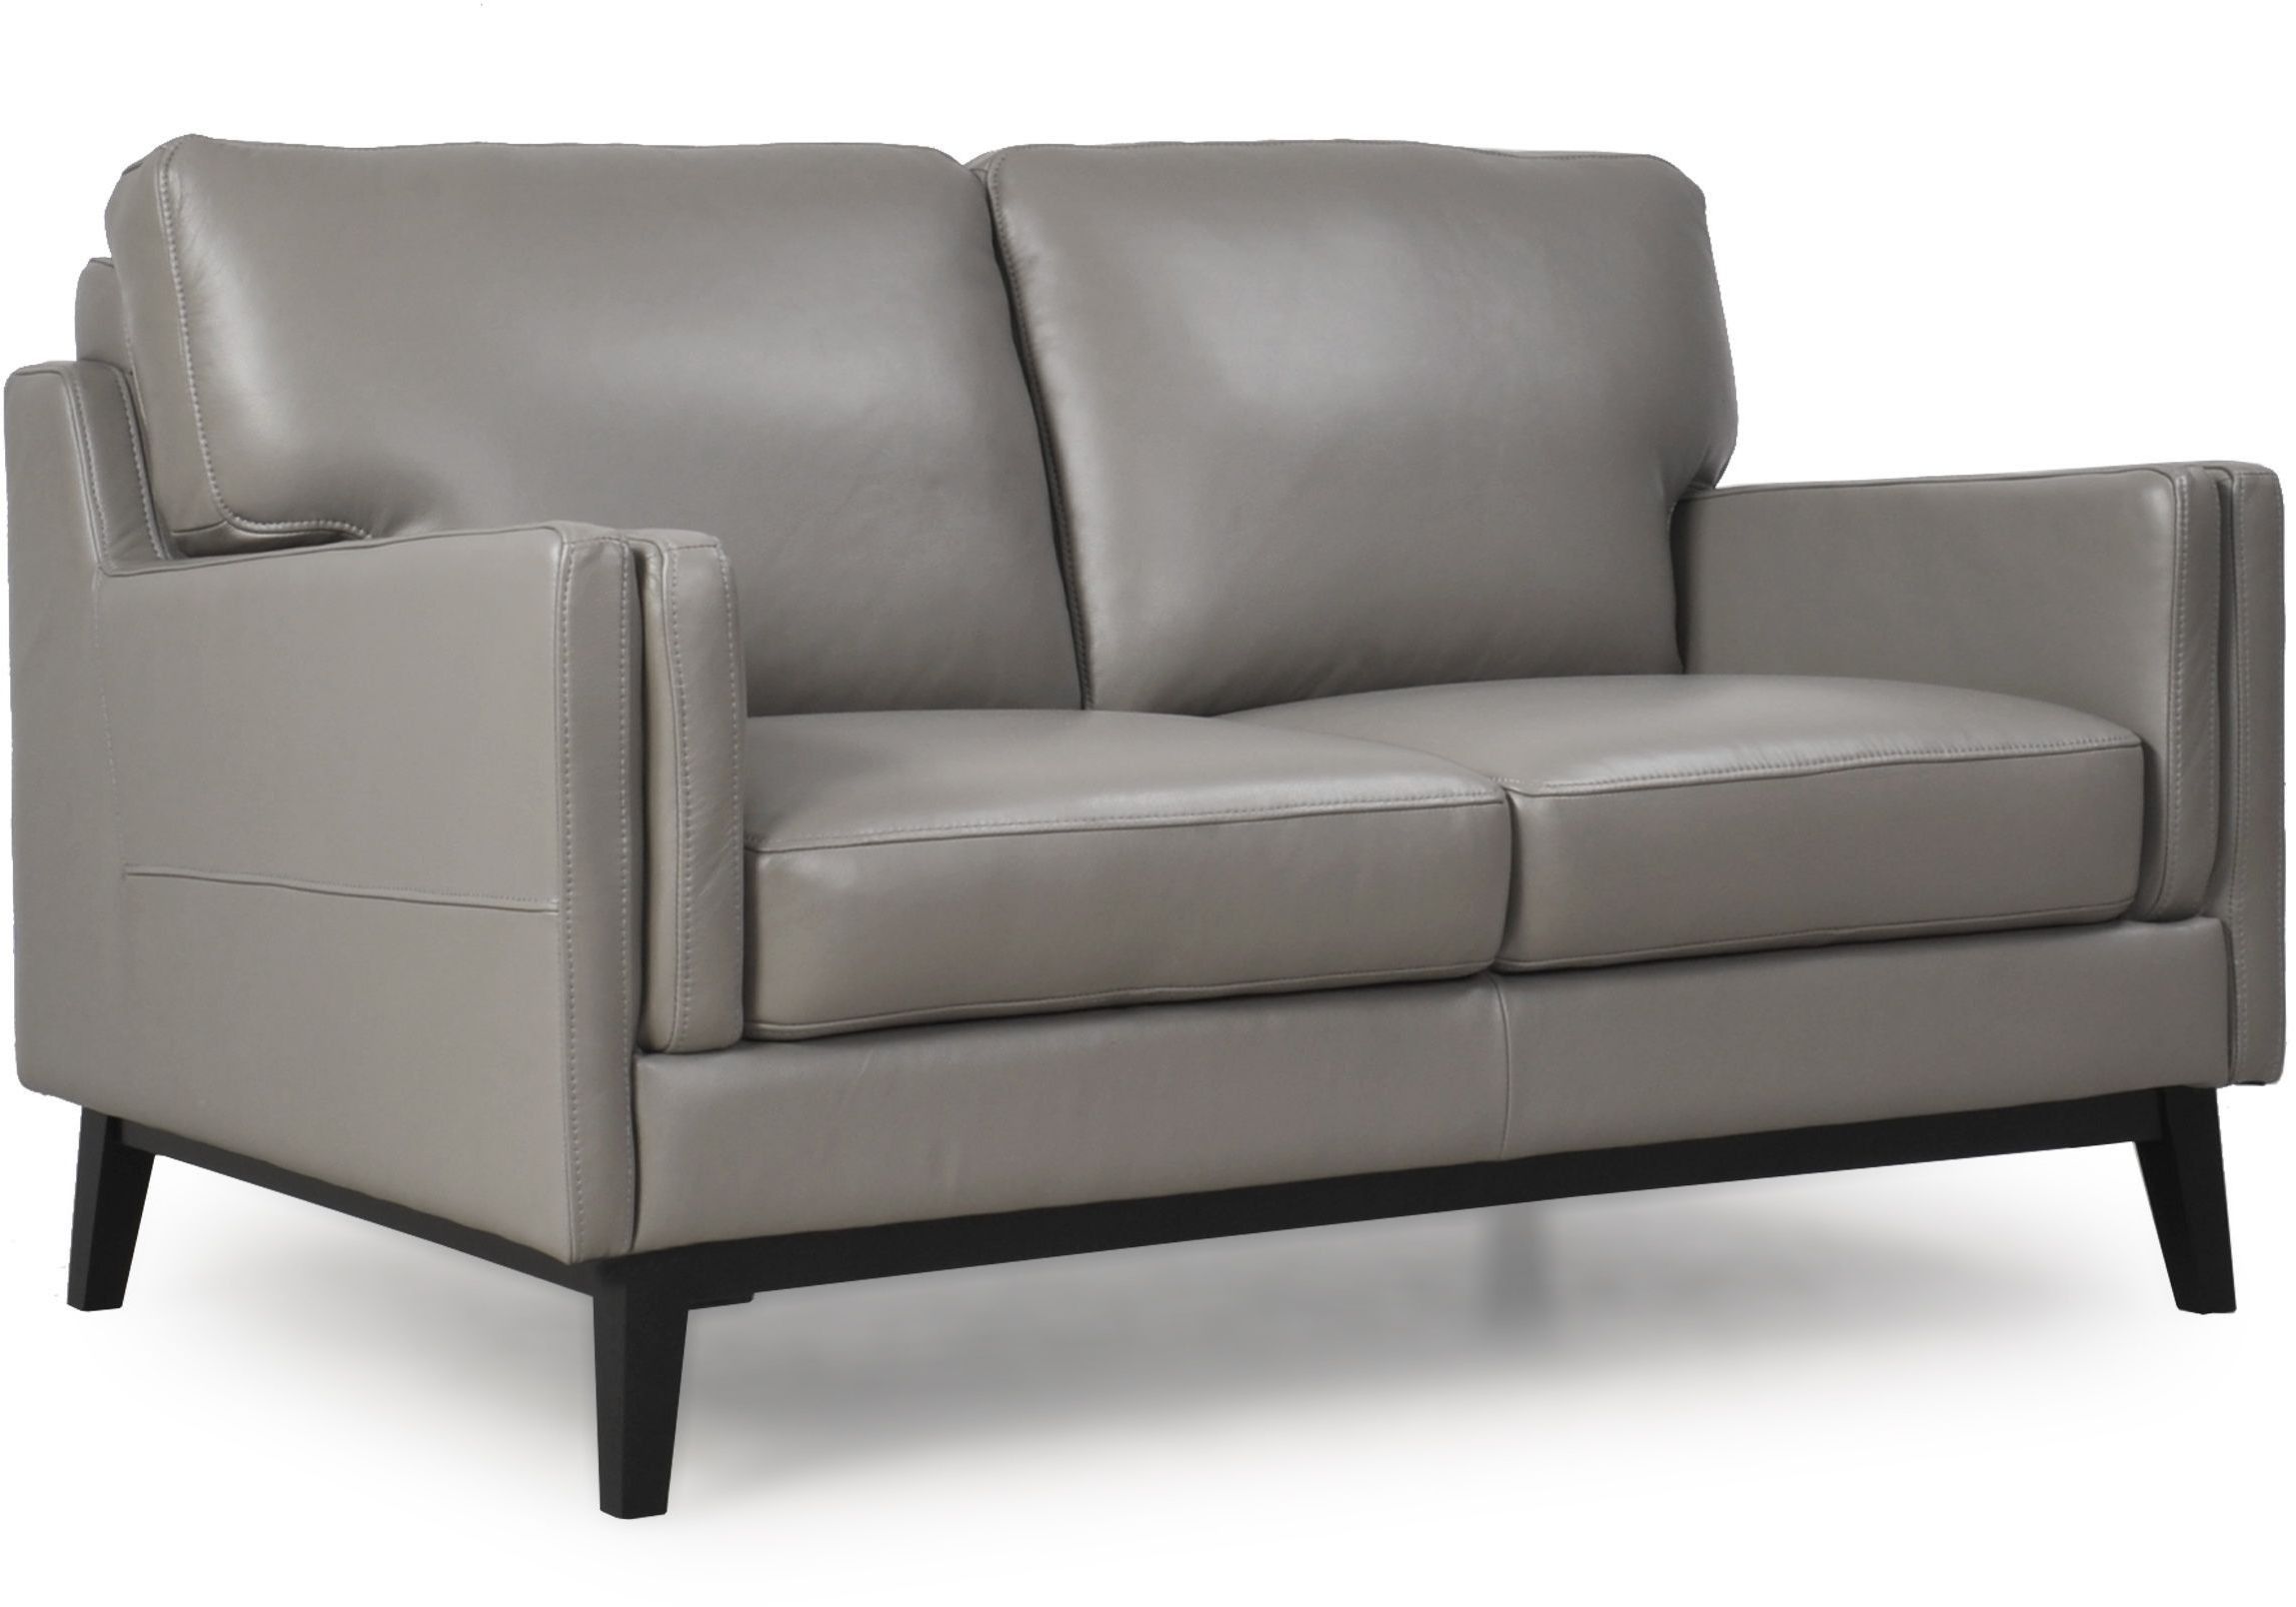 Osman Dark Grey Top Grain Leather Loveseat From Moroni | Coleman Furniture Pertaining To Top Grain Leather Loveseats (View 15 of 20)